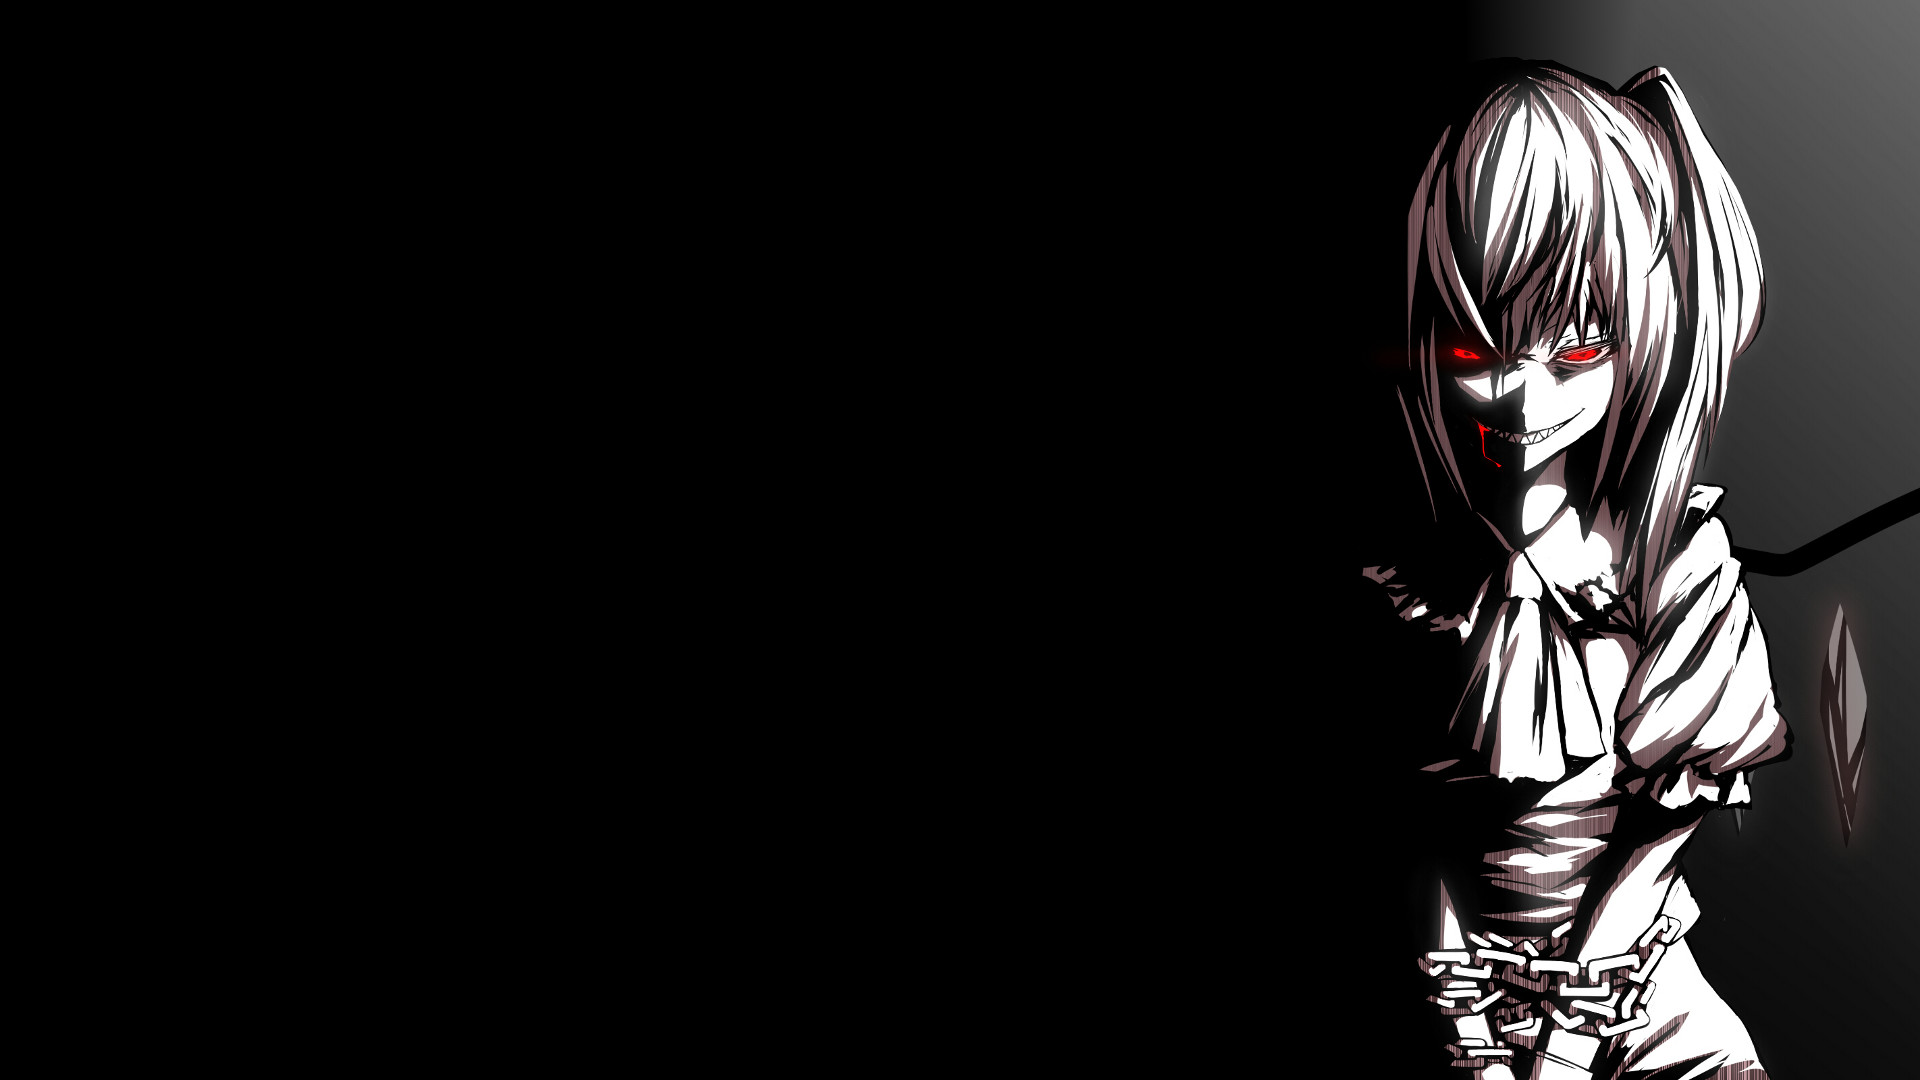 1920x1080 Widescreen Wallpapers: Anime HD, ( px, V.55) - GG